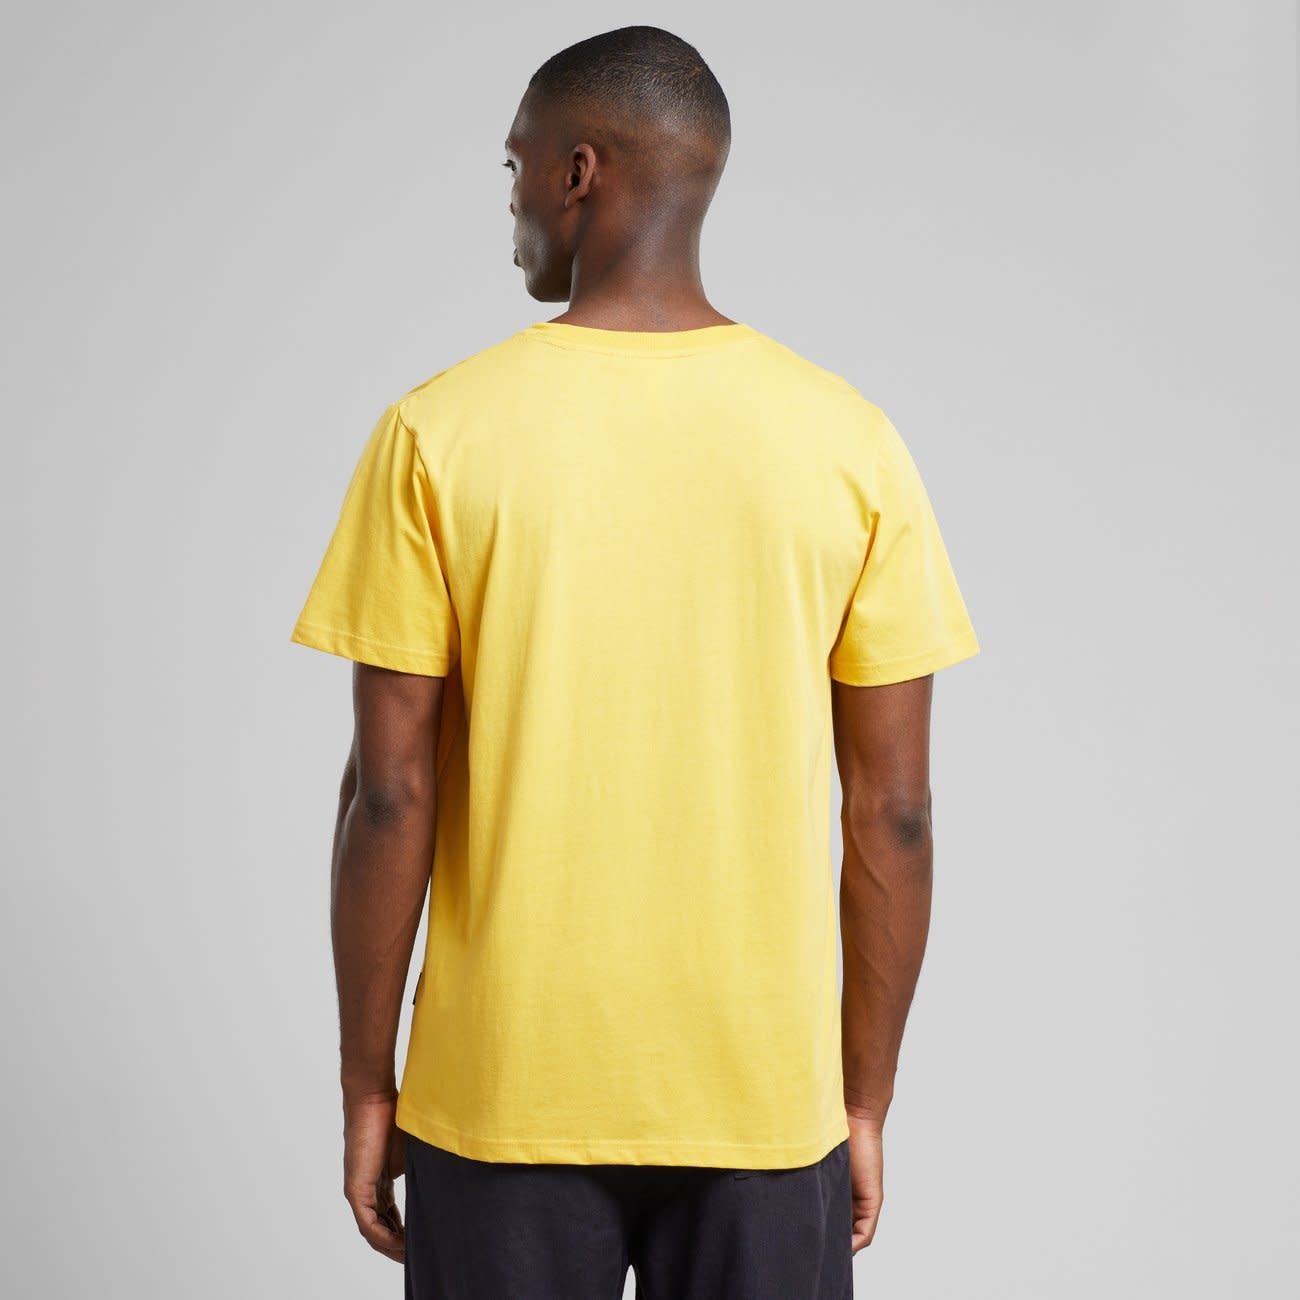 Dedicated Dedicated, Stockholm Base, misted yellow, L